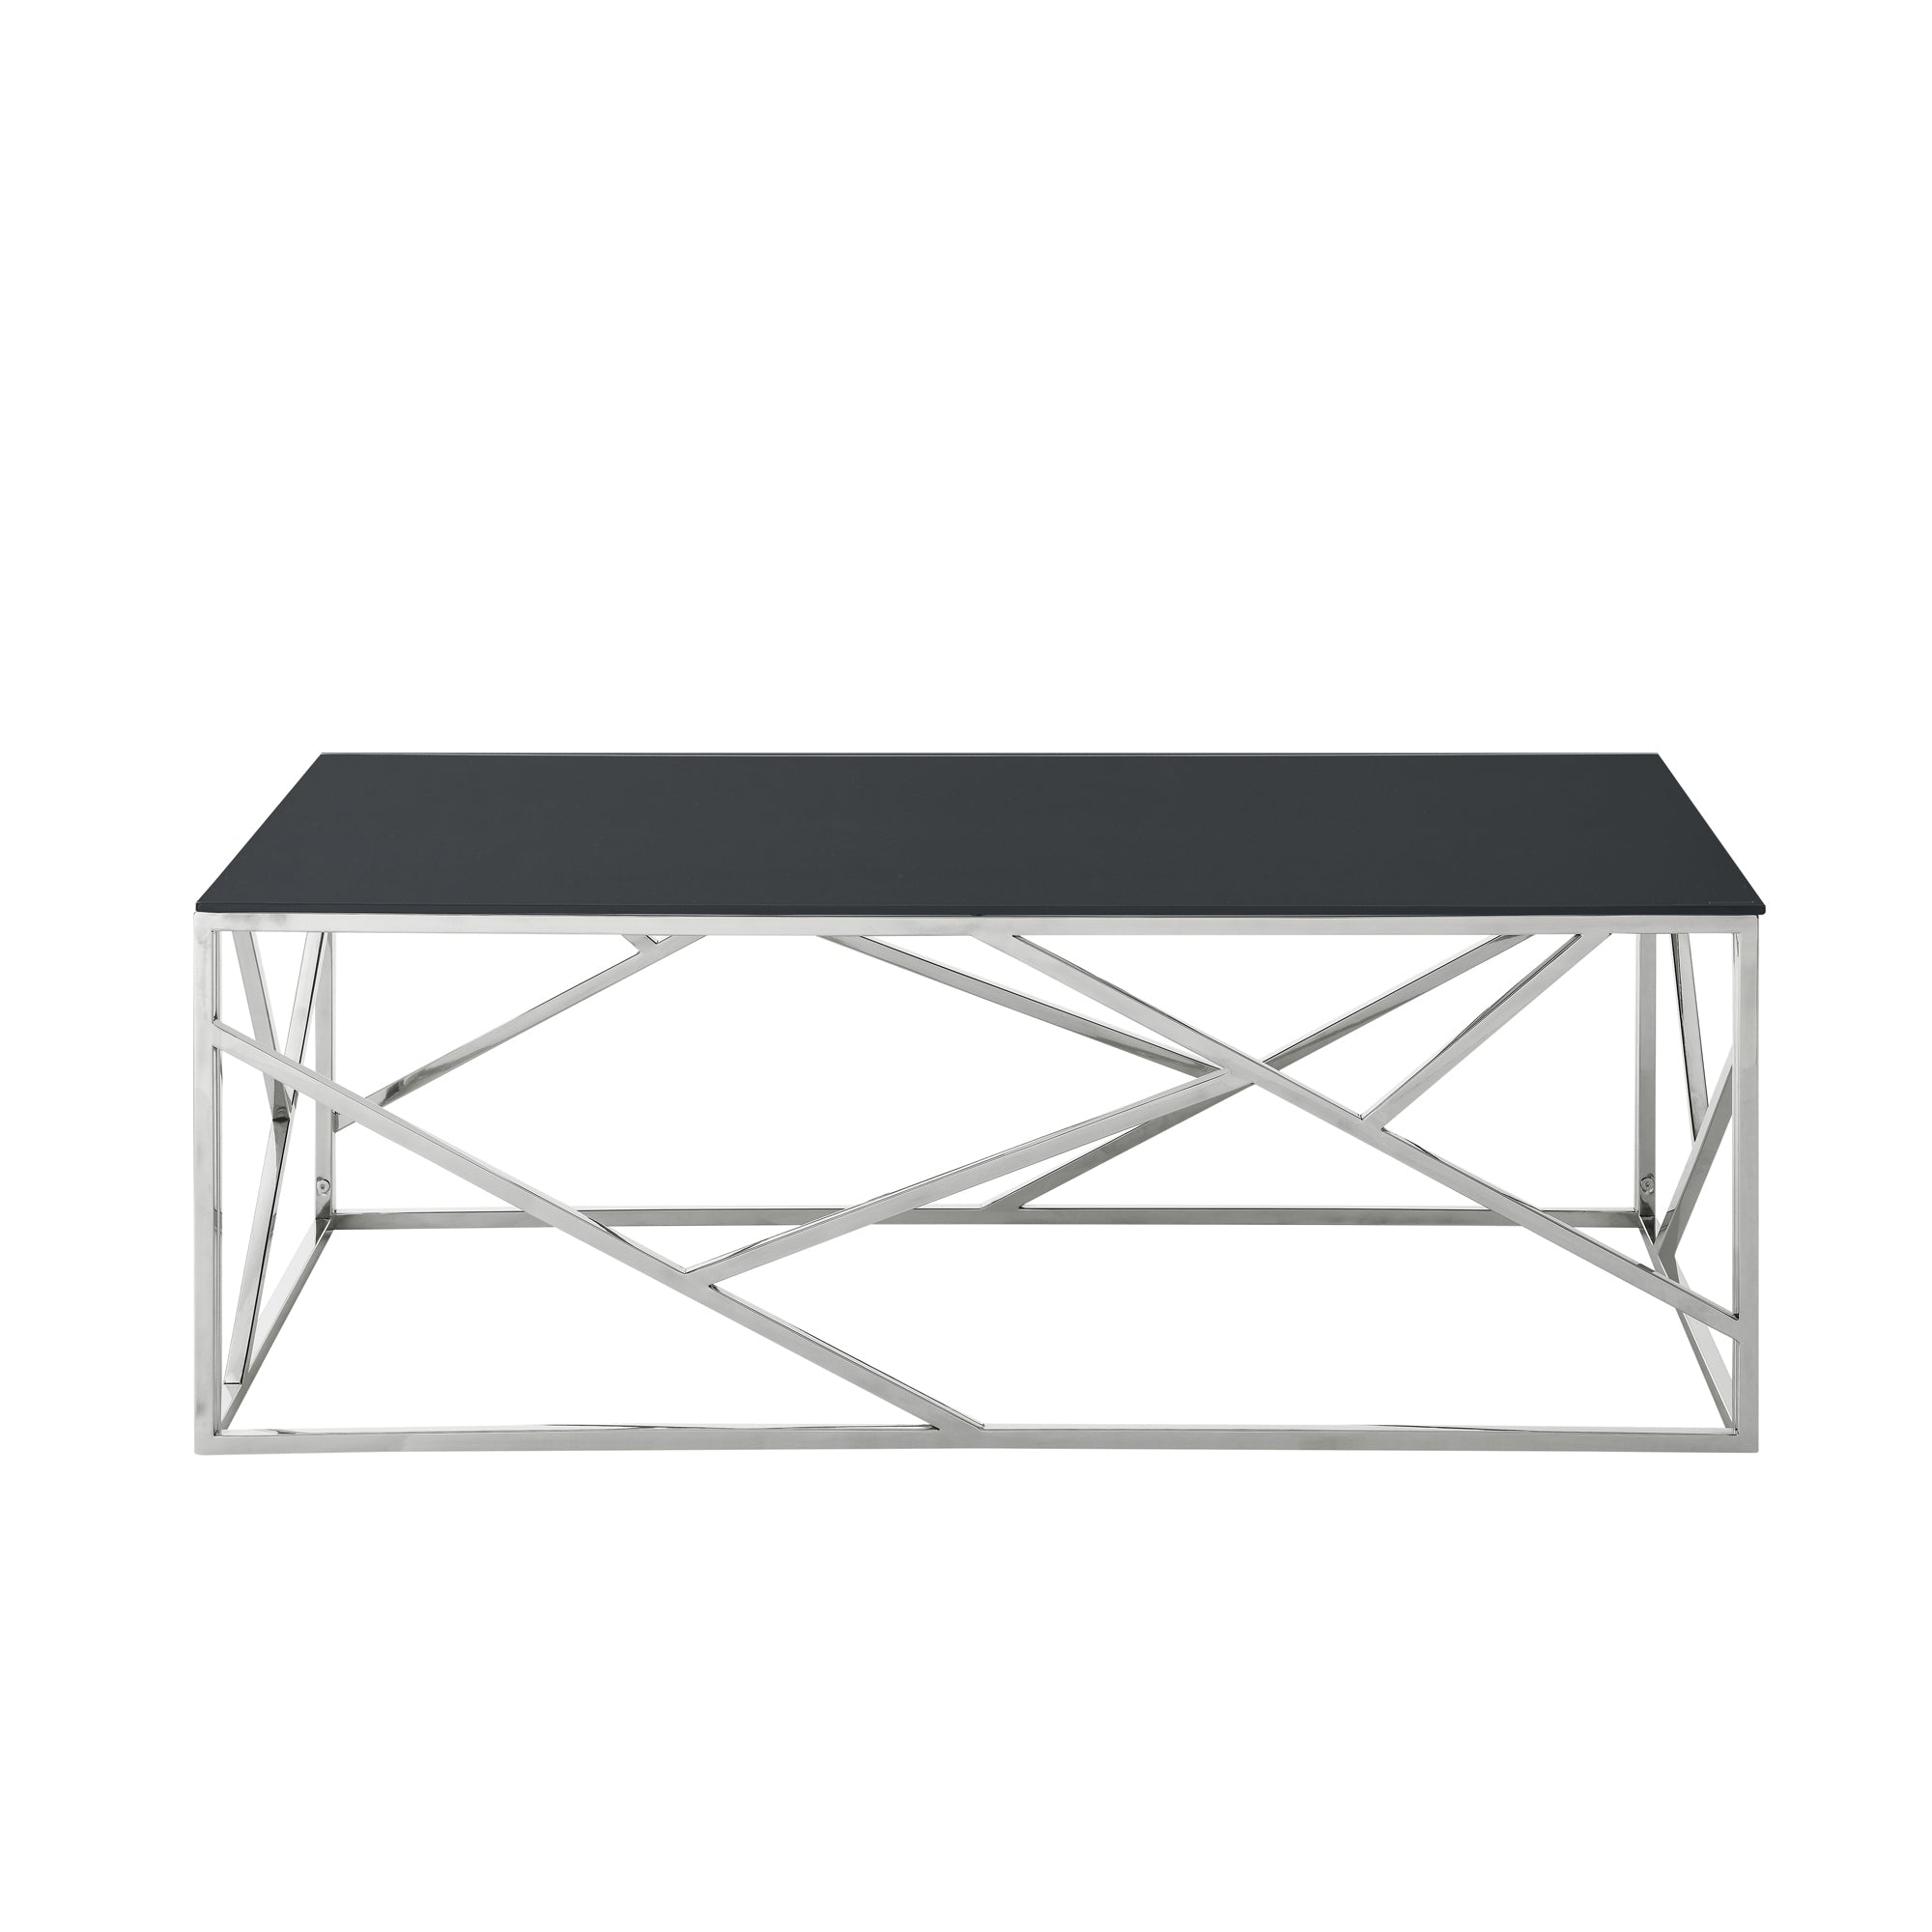 Modern Rectangular Coffee Accent Table with Black Tempered Glass Top and Stainless Steel Frame - Polished Chrome